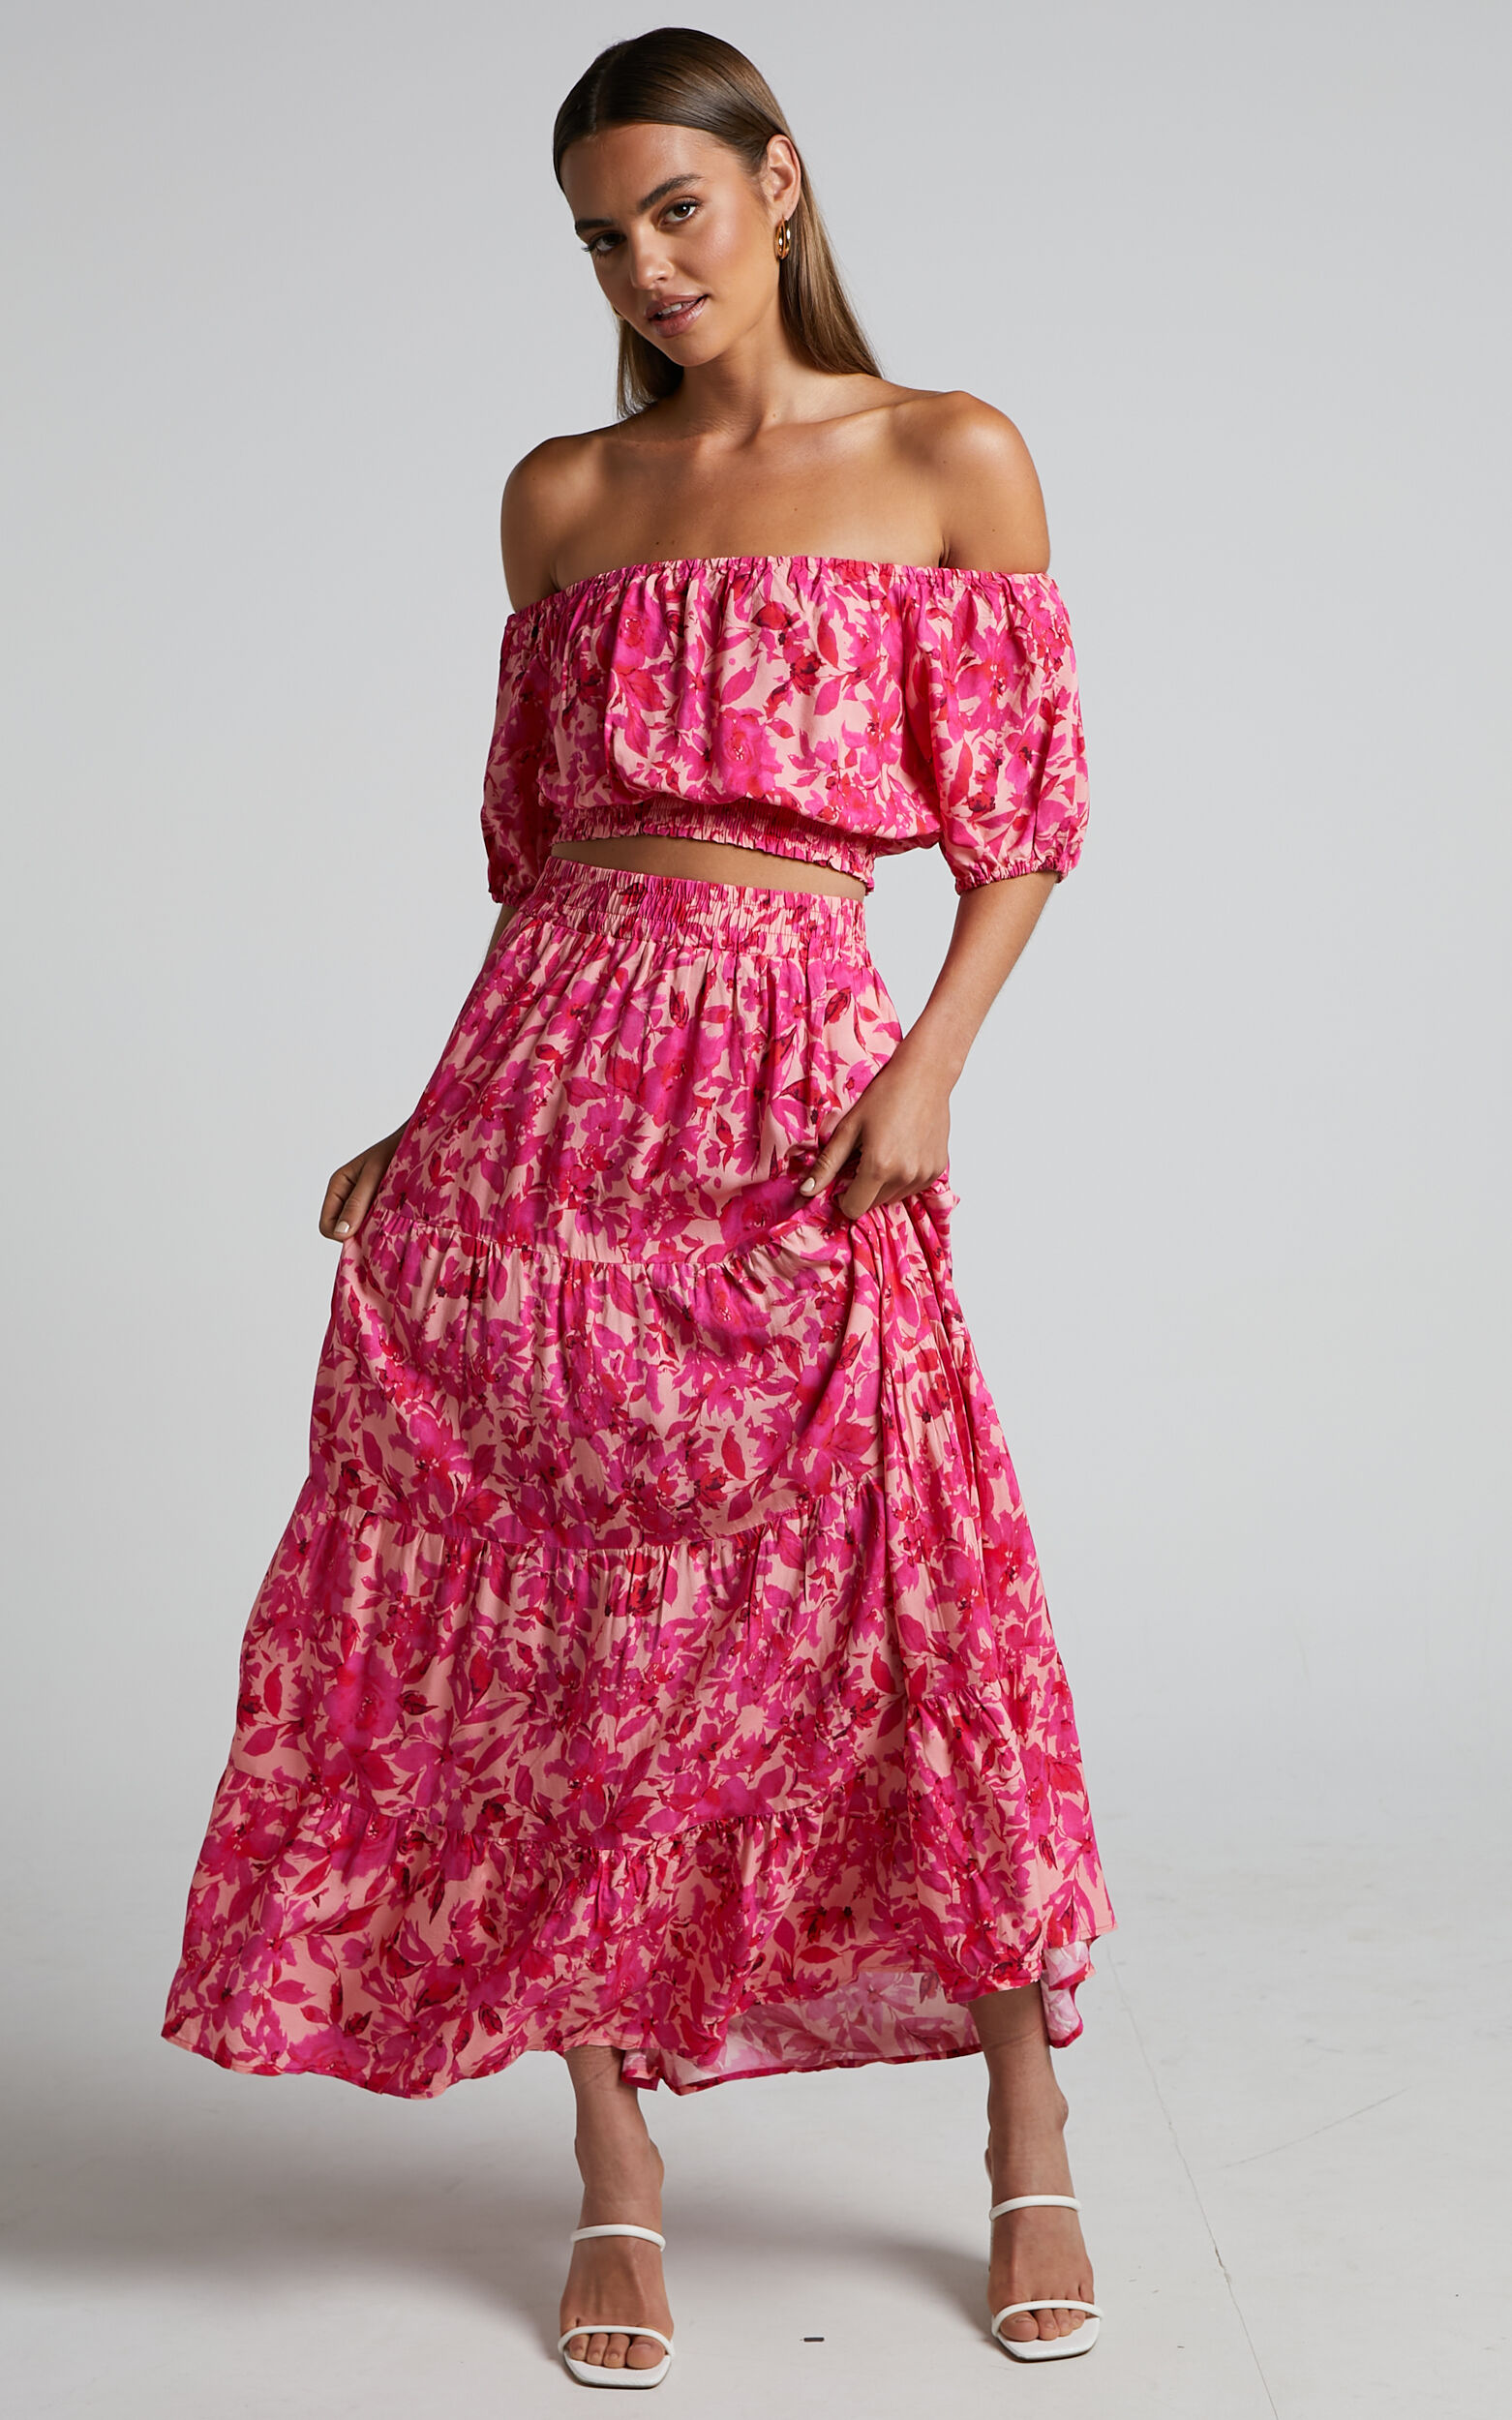 Lydia Skirt - Tiered Maxi Skirt in Pink Floral - 06, PNK2, super-hi-res image number null